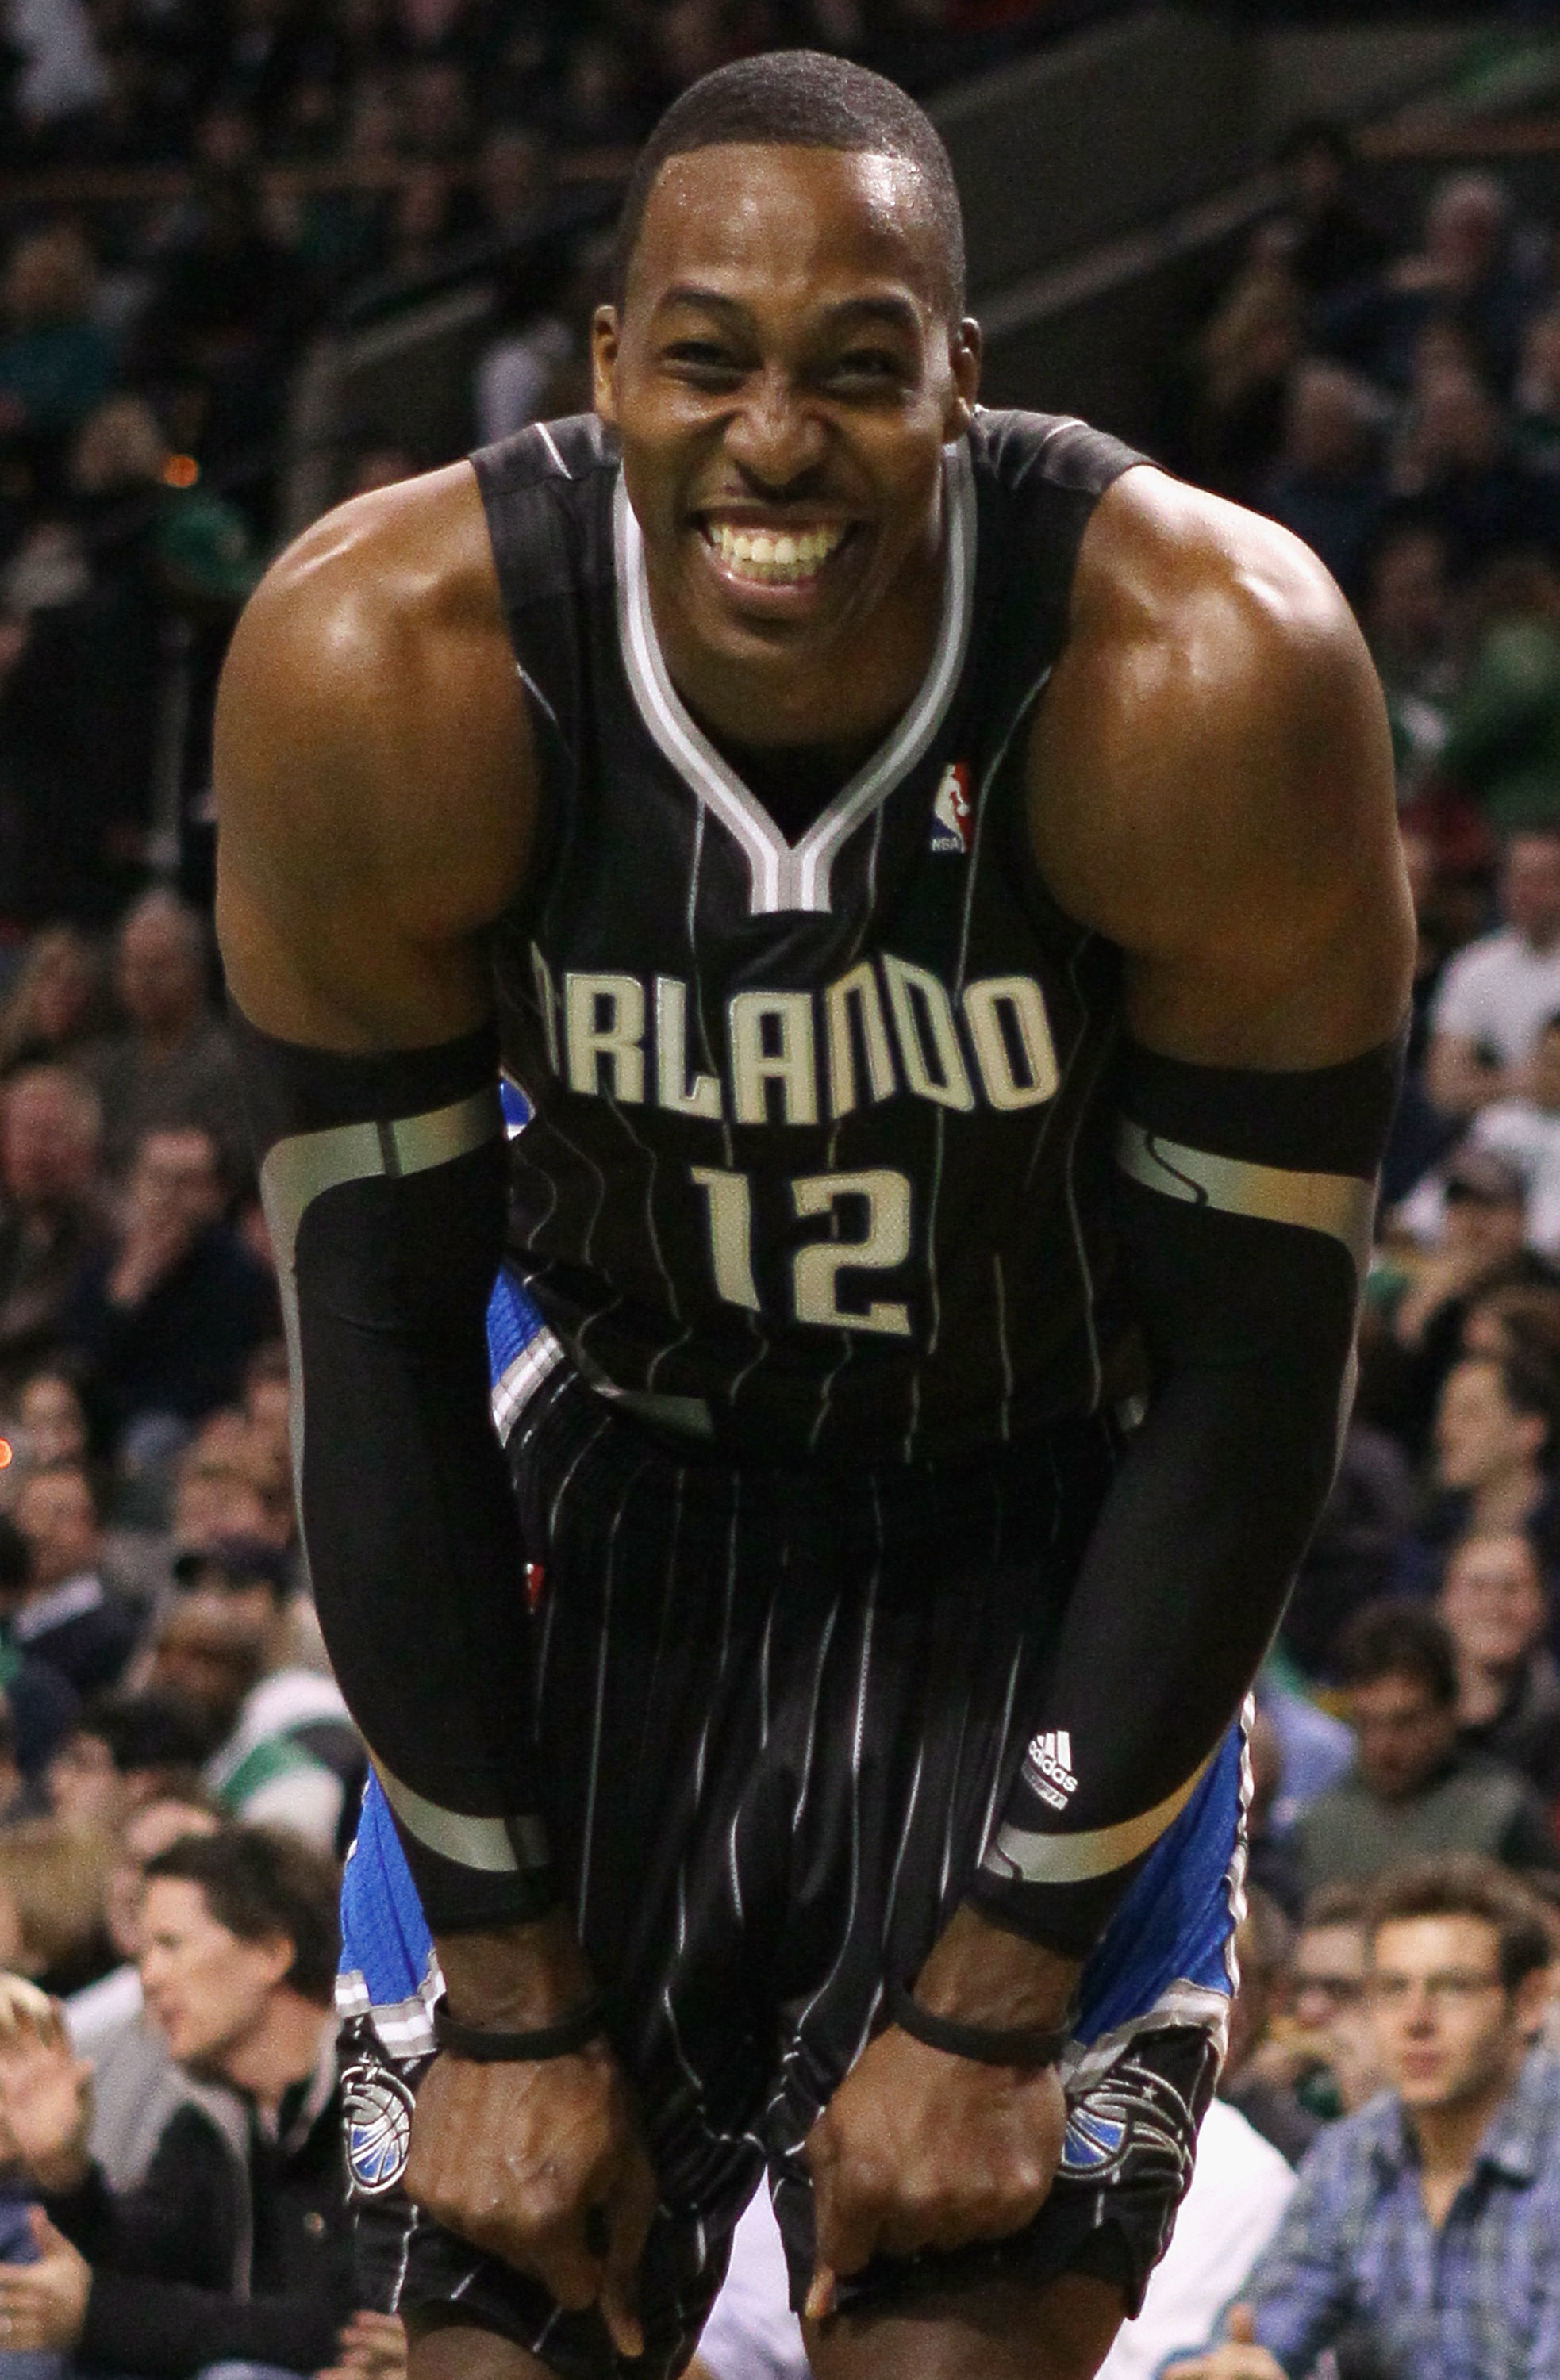 BOSTON, MA - JANUARY 17:  Dwight Howard #12 of the Orlando Magic smiles on the baseline as he waits for Shaquille O'Neal of the Boston Celtics to shoot a free throw on January 17, 2011 at the TD Garden in Boston, Massachusetts.  NOTE TO USER: User express